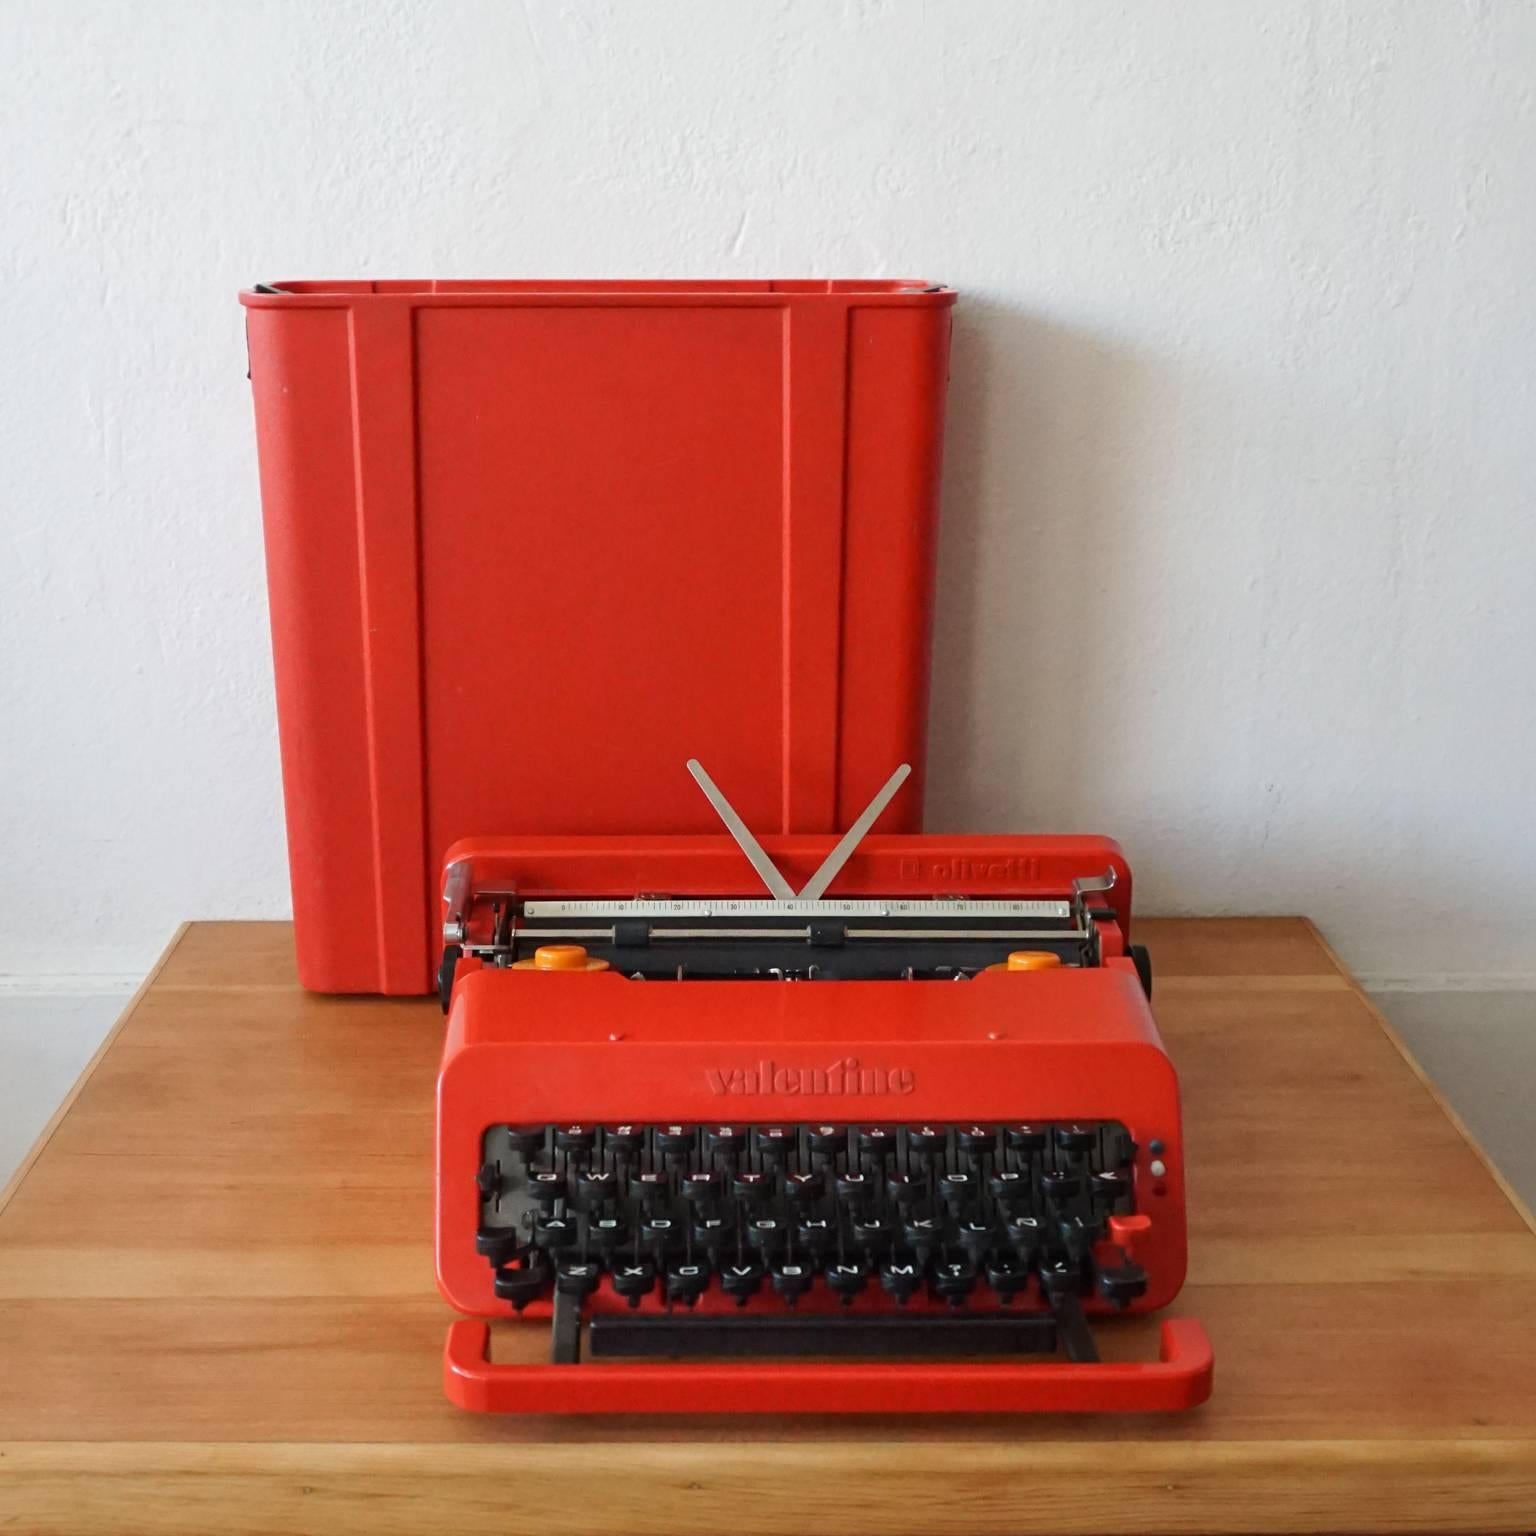 Olivetti Valentine Typewriter by Ettore Sottsass Jr. and Perry King, 1968. Incredibly good condition, with original case and rubber straps. Freshly-serviced with new ribbon. Works perfectly. 

This is the less often seen Spanish version with